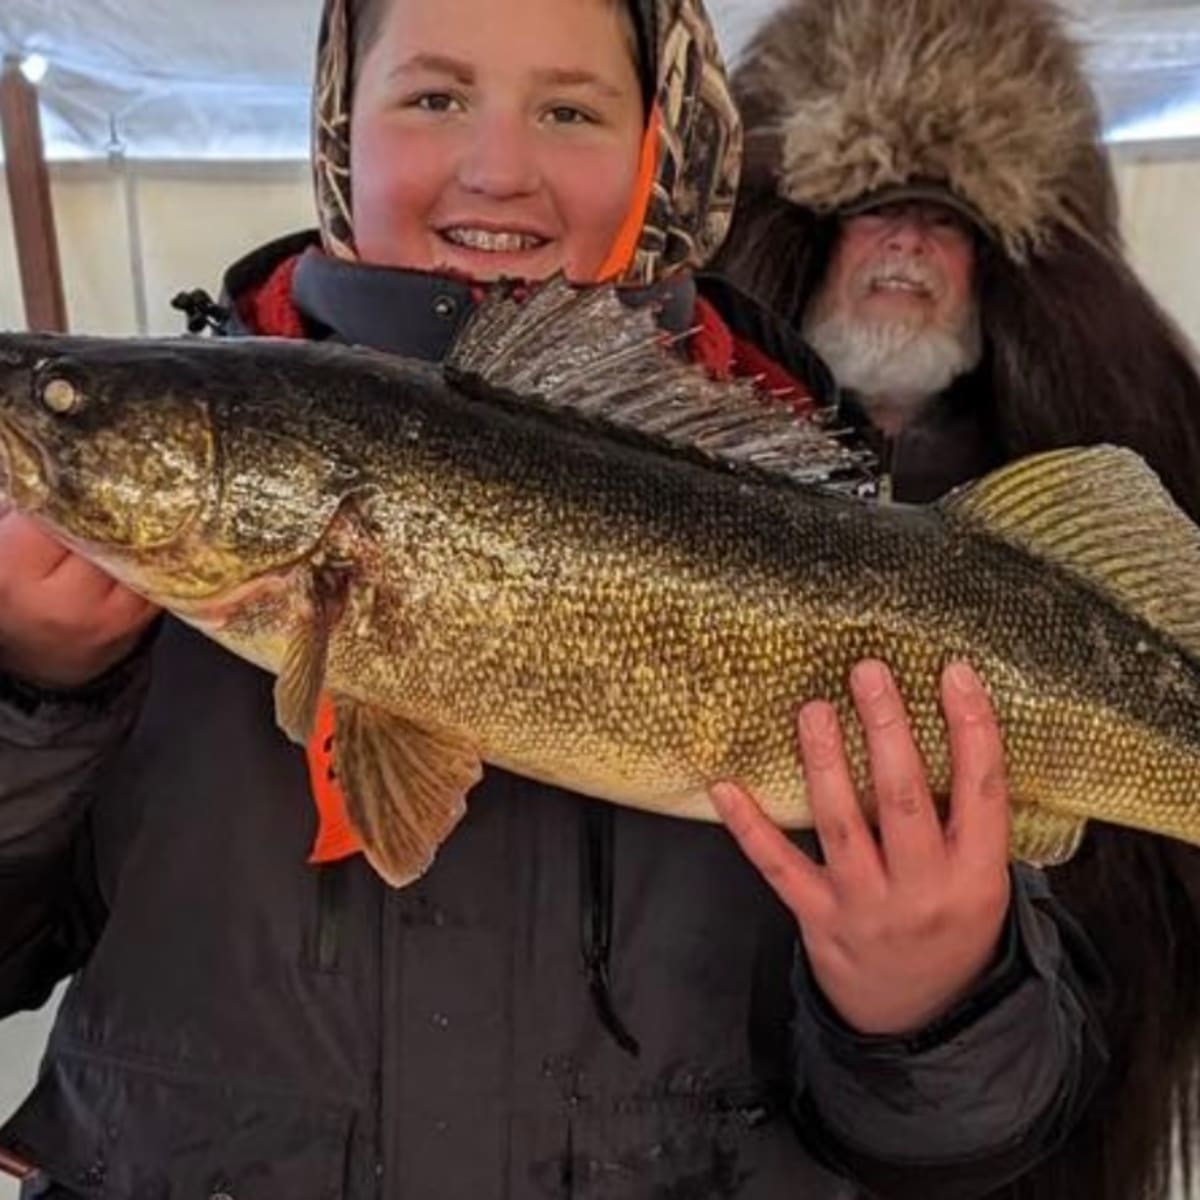 Angler, 13, reels in nearly 10 lb walleye, wins new truck at Minnesota ice  fishing tourney - Bring Me The News